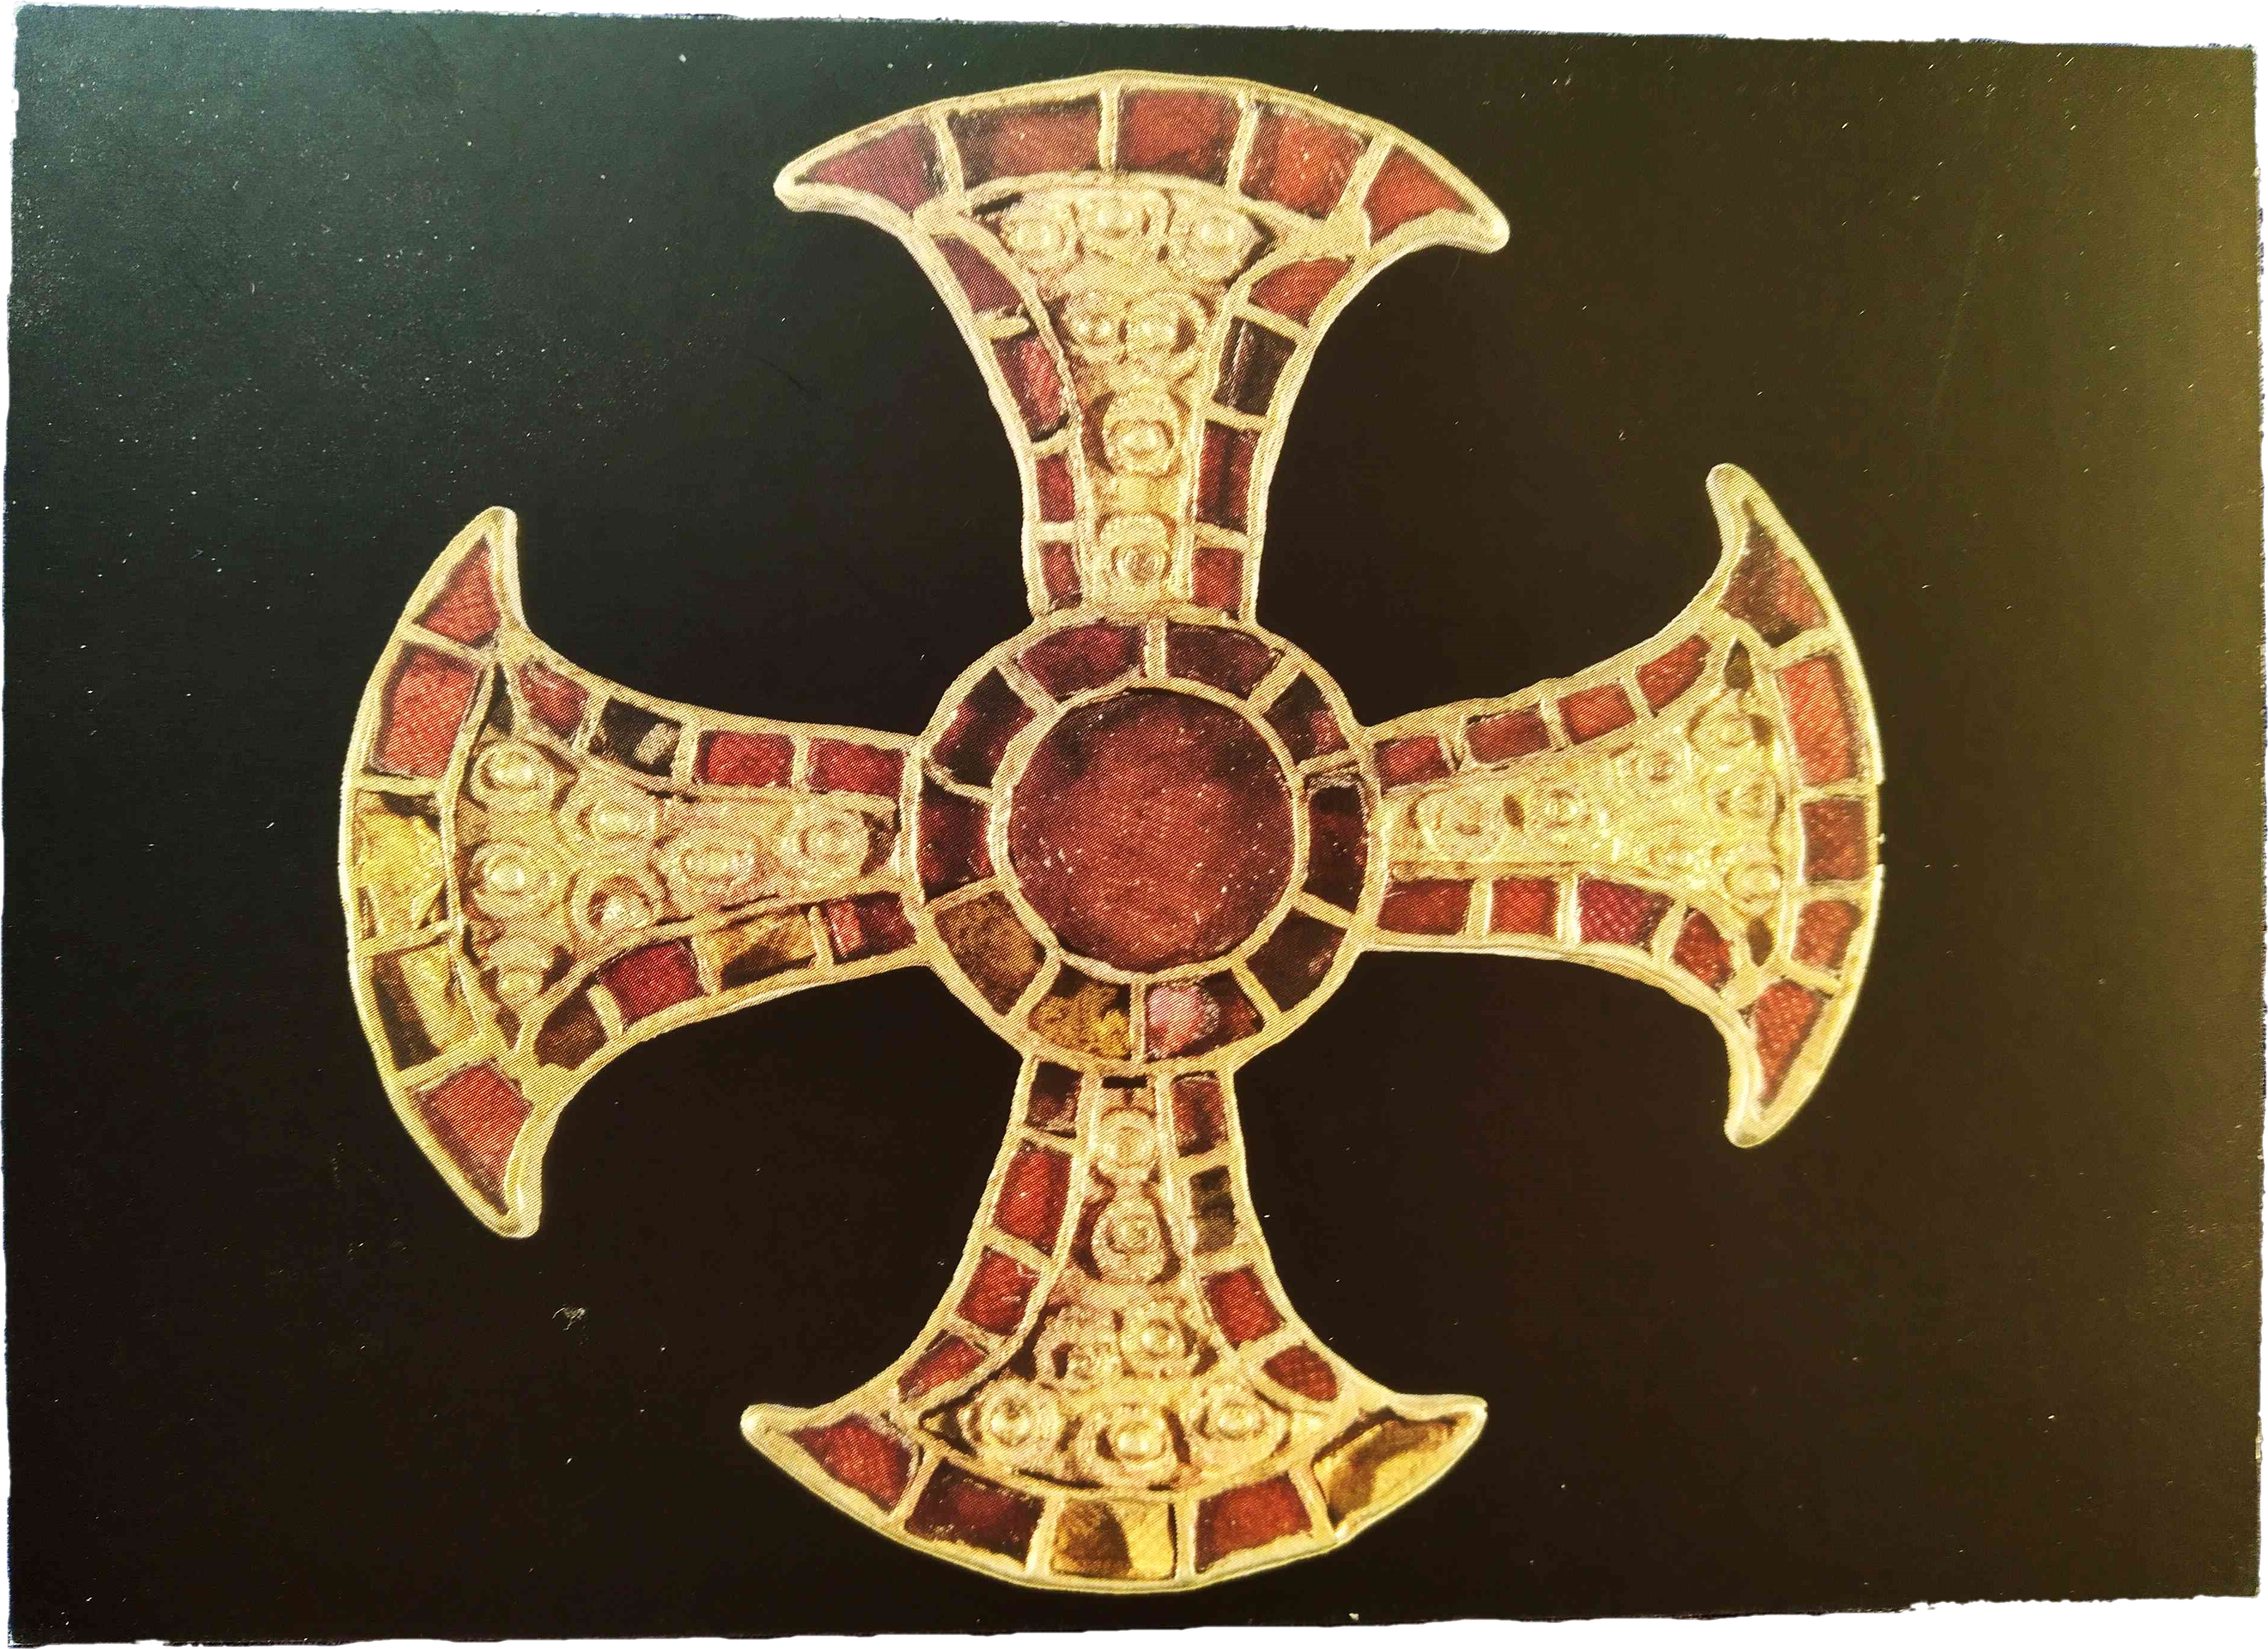 A photograph of an ornately designed anglo saxon cross